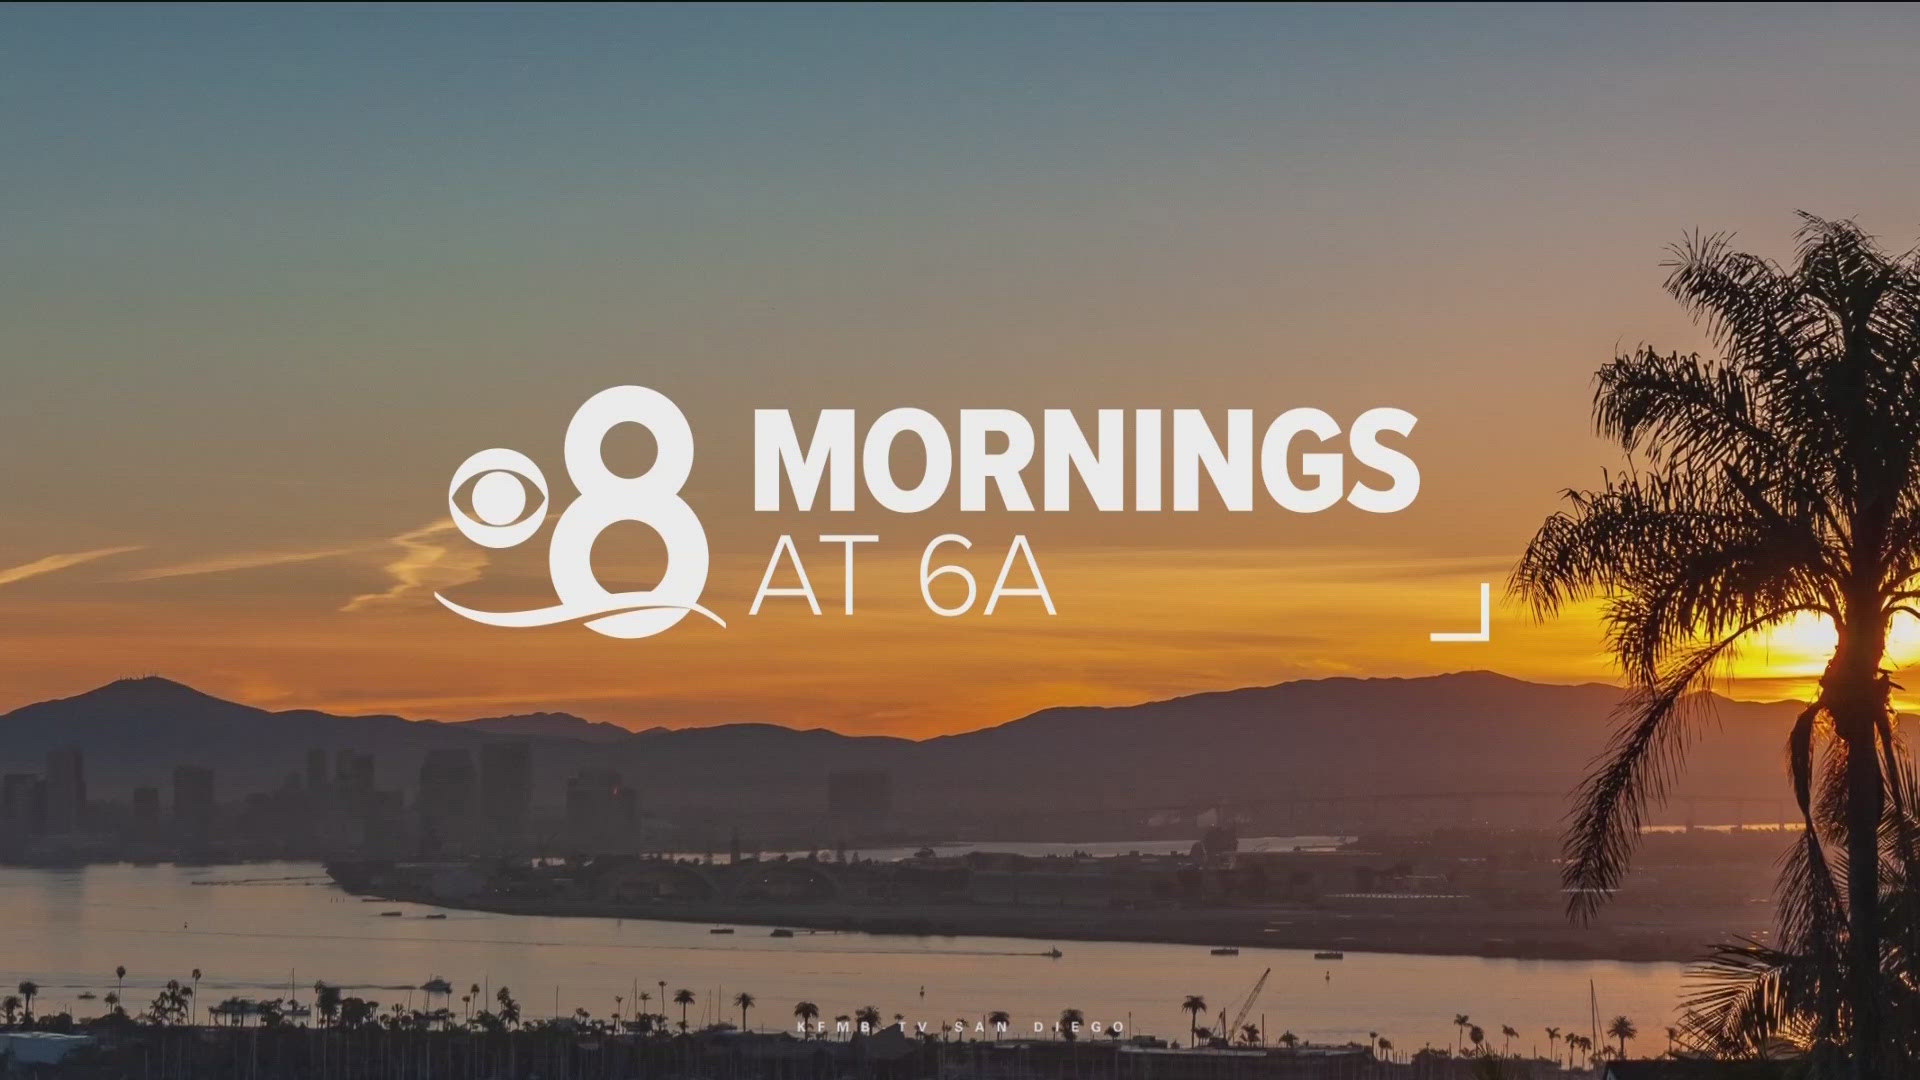 Here are the top stories around San Diego County for the morning of Friday, July 5th.
For the latest news, weather and sports, head to:
https://www.cbs8.com/